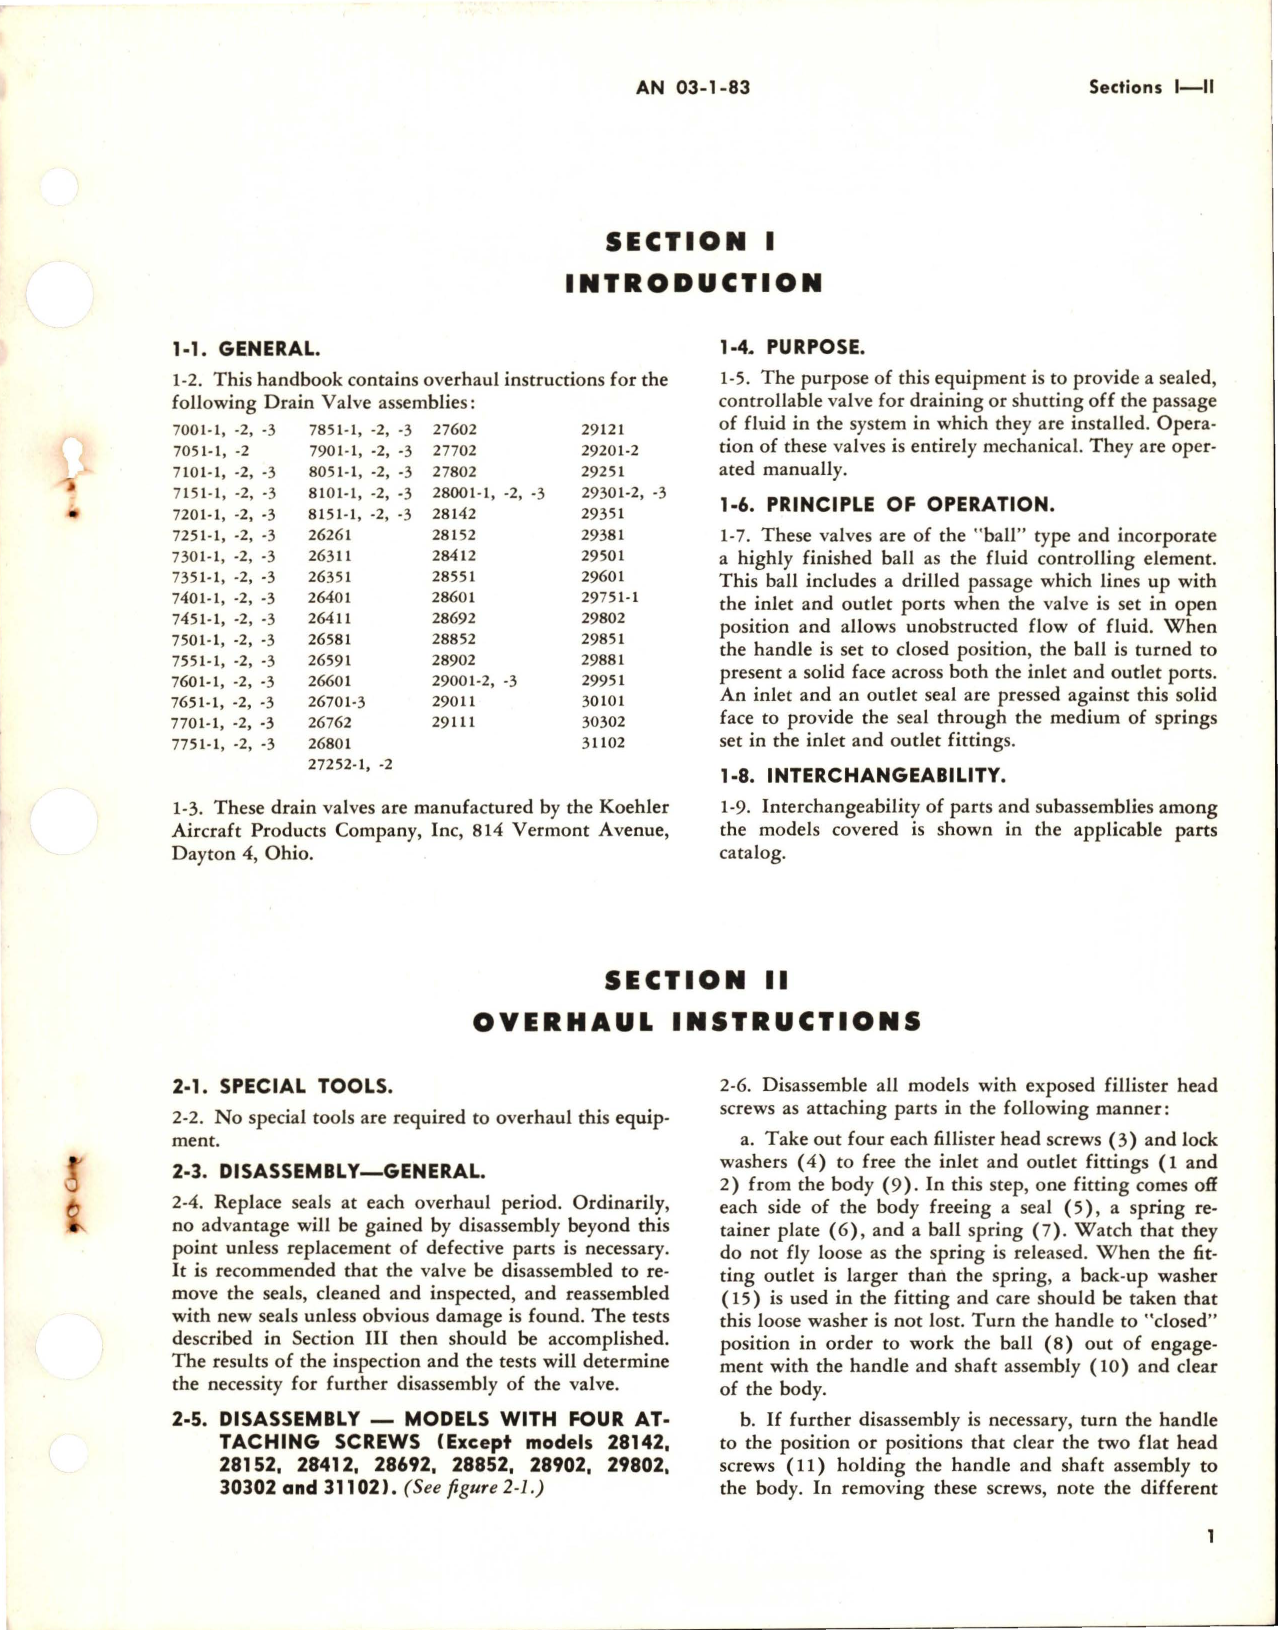 Sample page 5 from AirCorps Library document: Overhaul Instructions for Ball Type Drain Valves